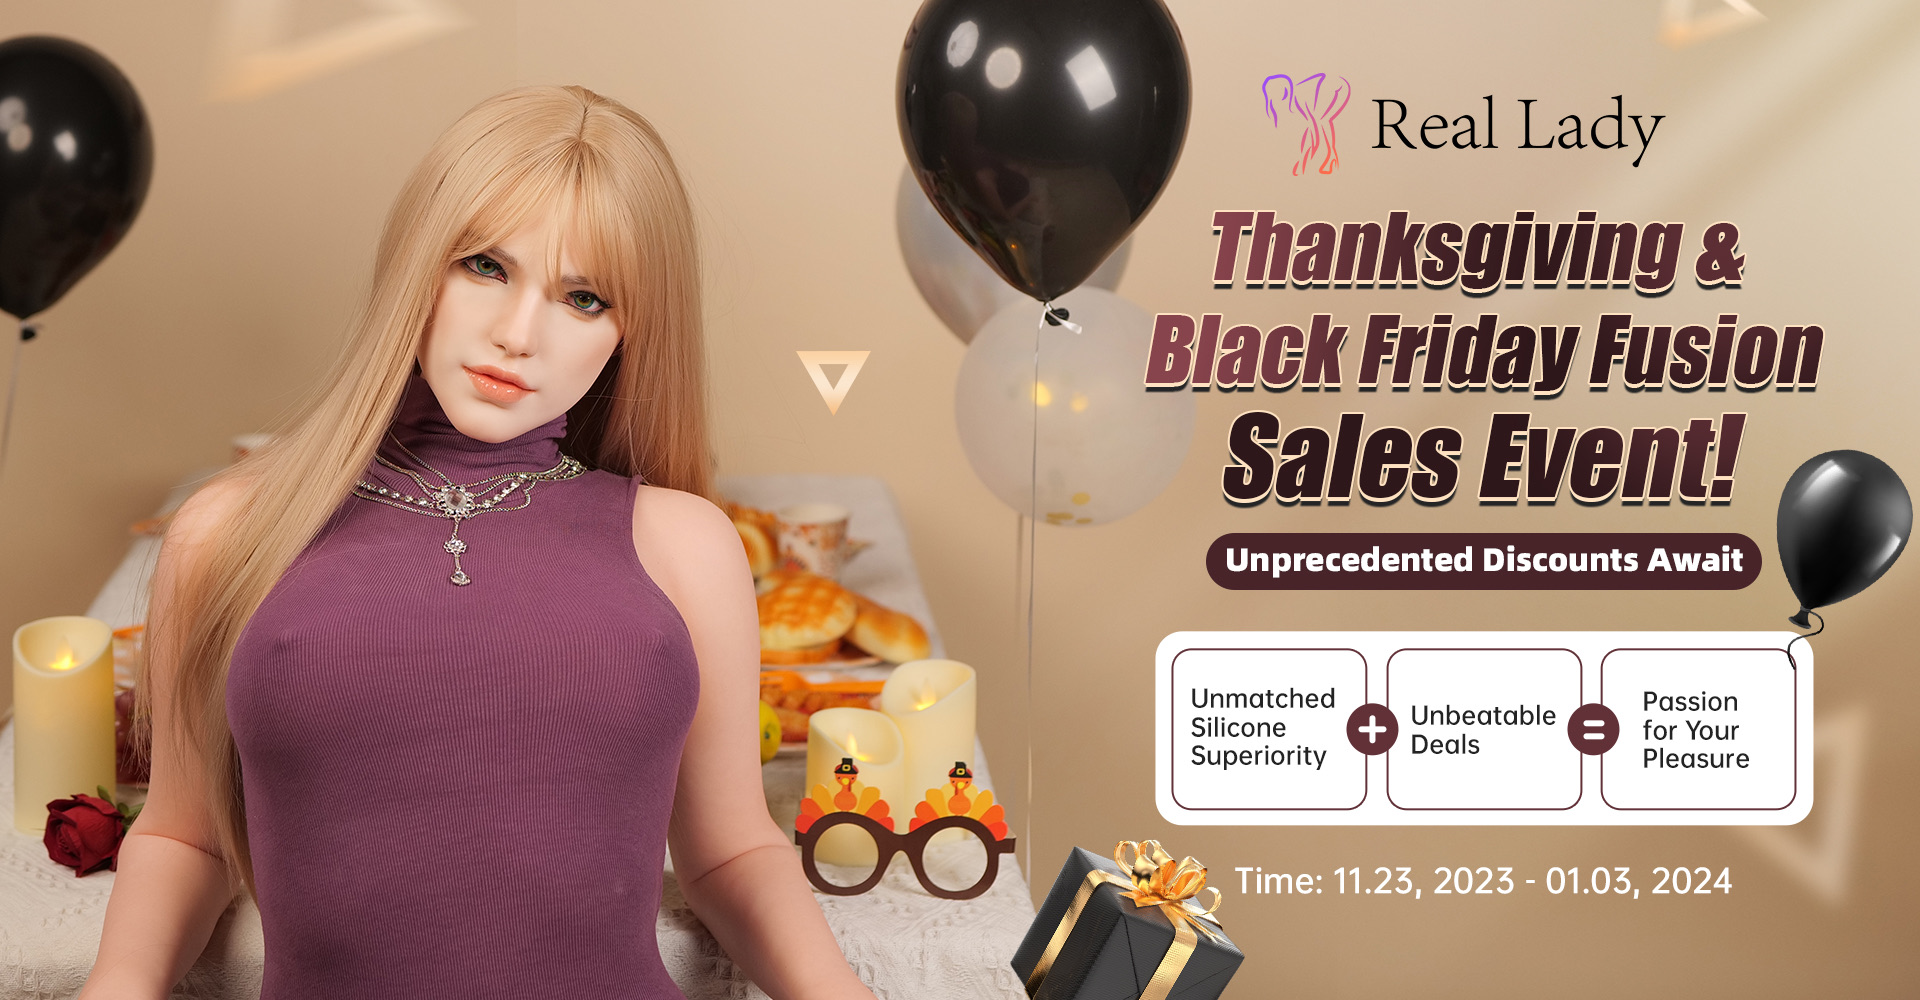 Real Lady Black Friday Sale 2023